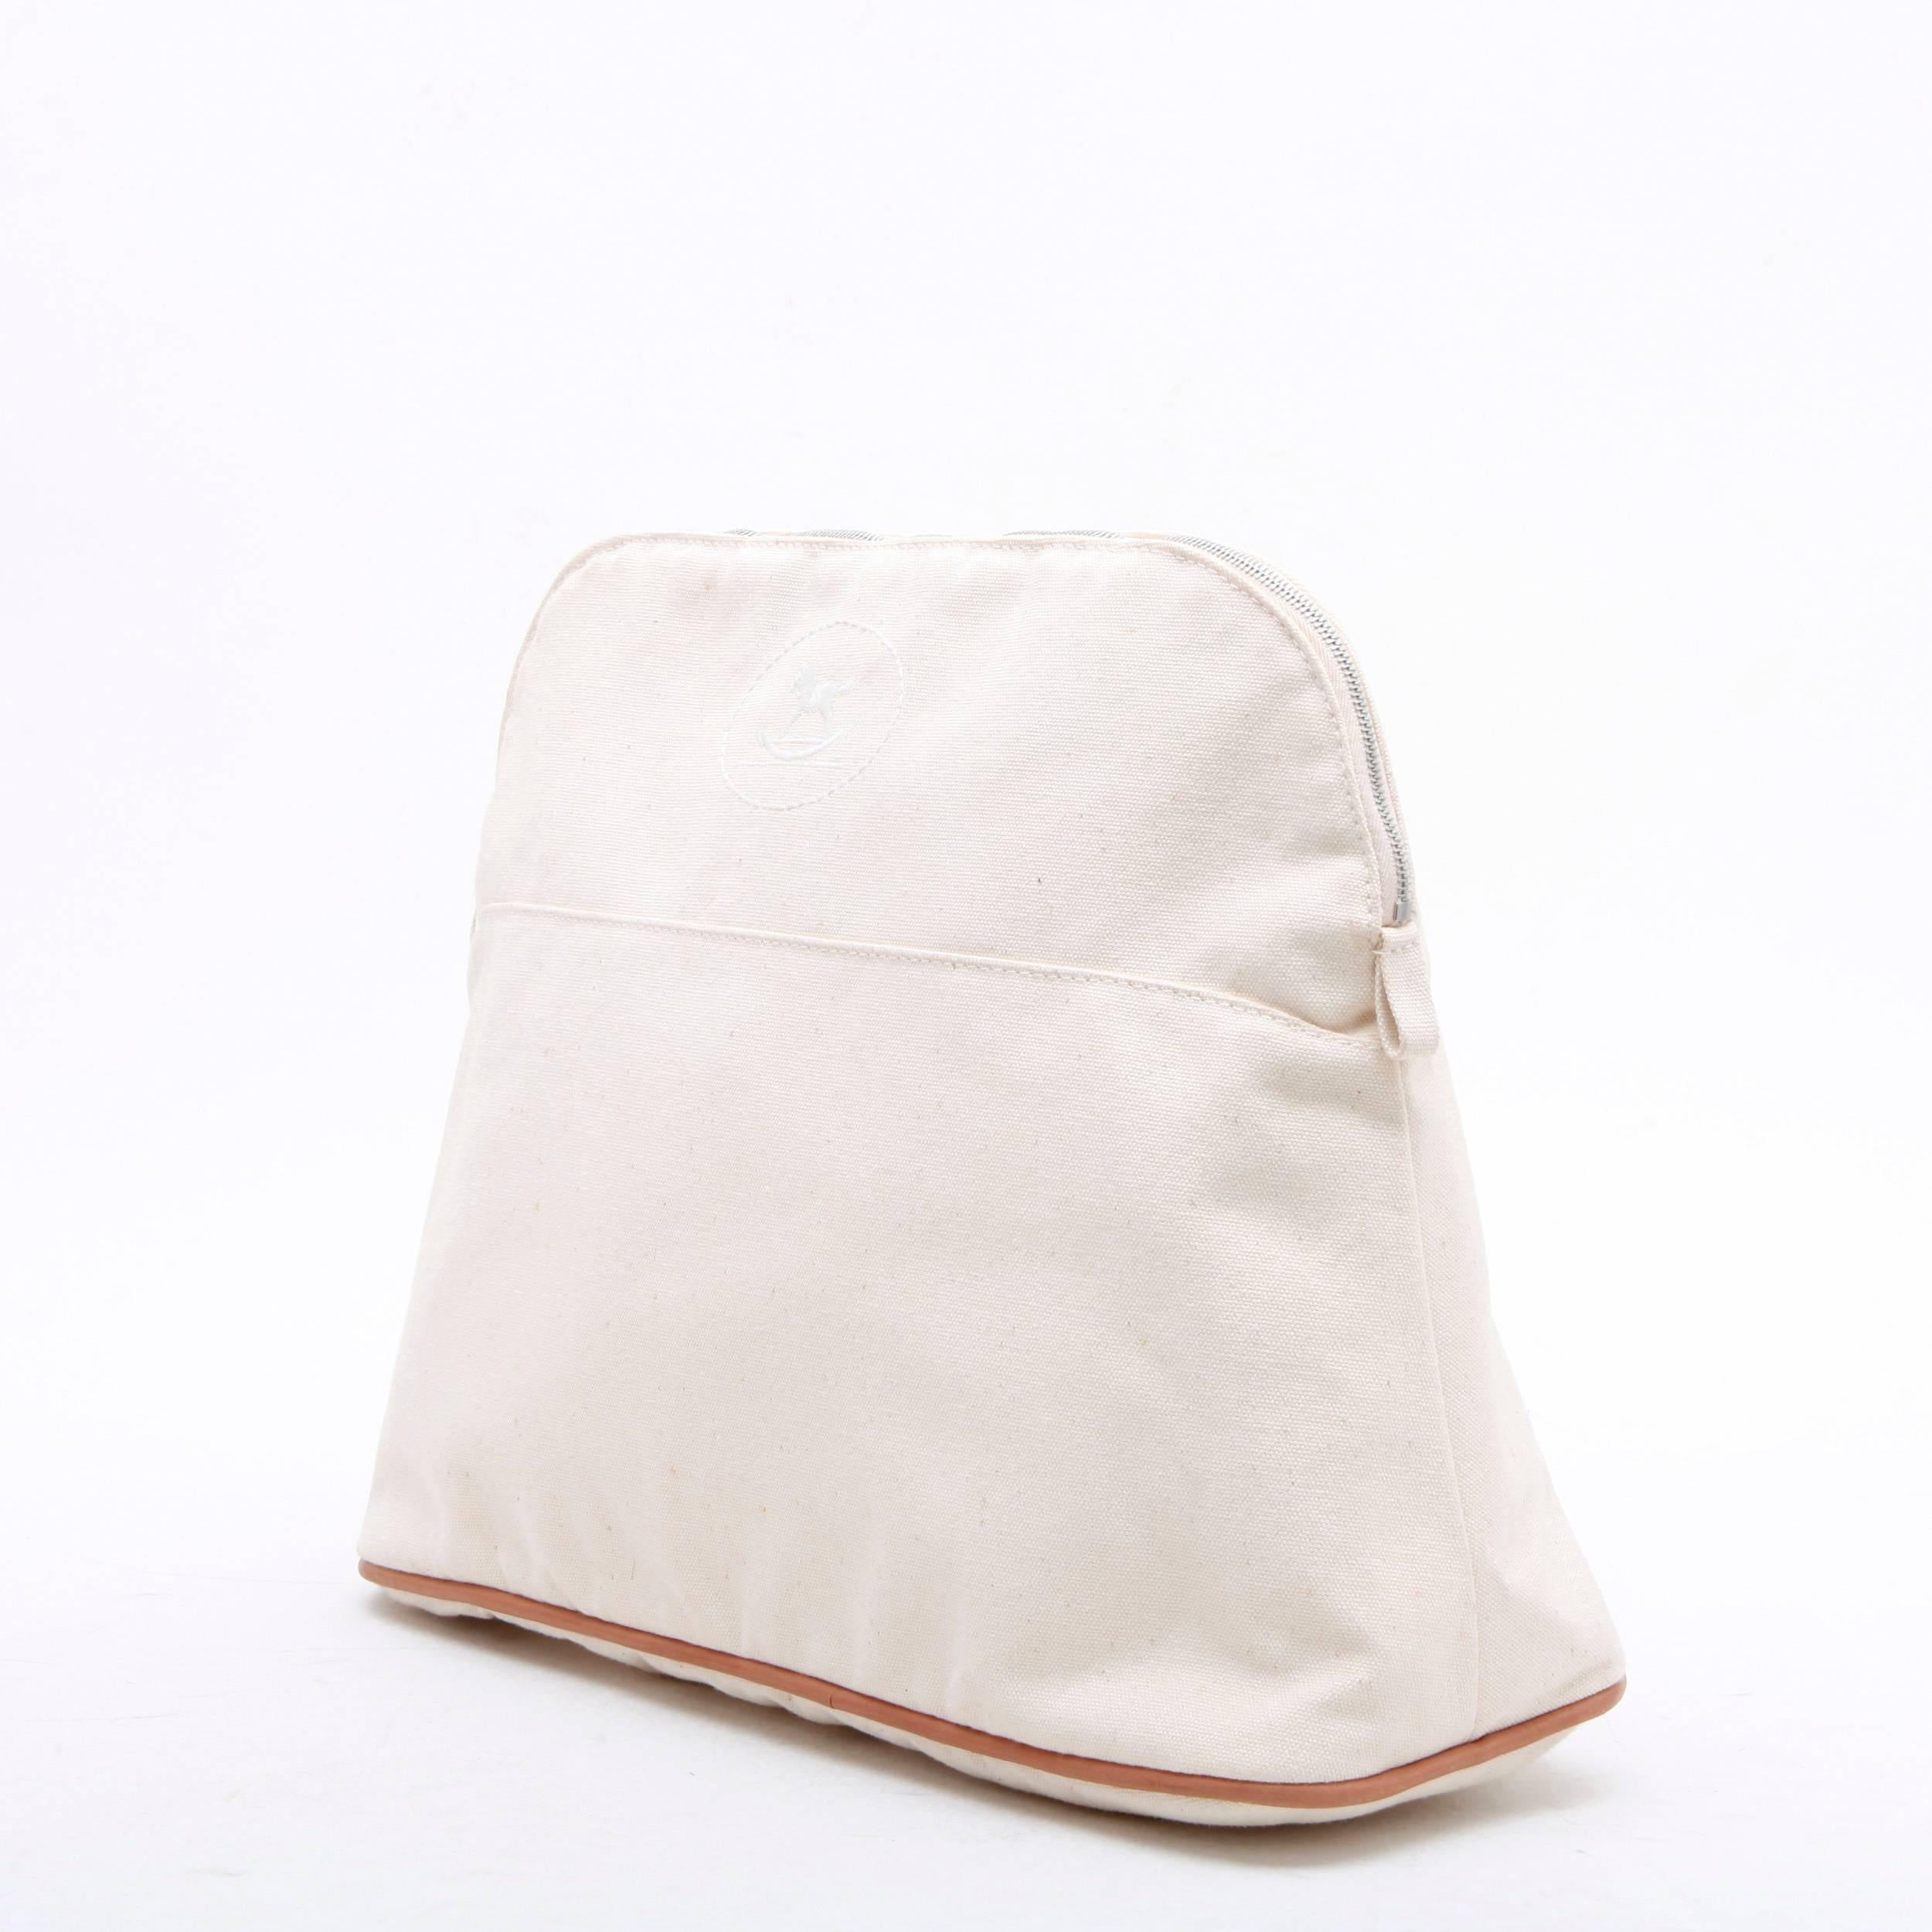 Beige HERMES Toilet Bag in Ecru Fabric Lined with Gilded Leather